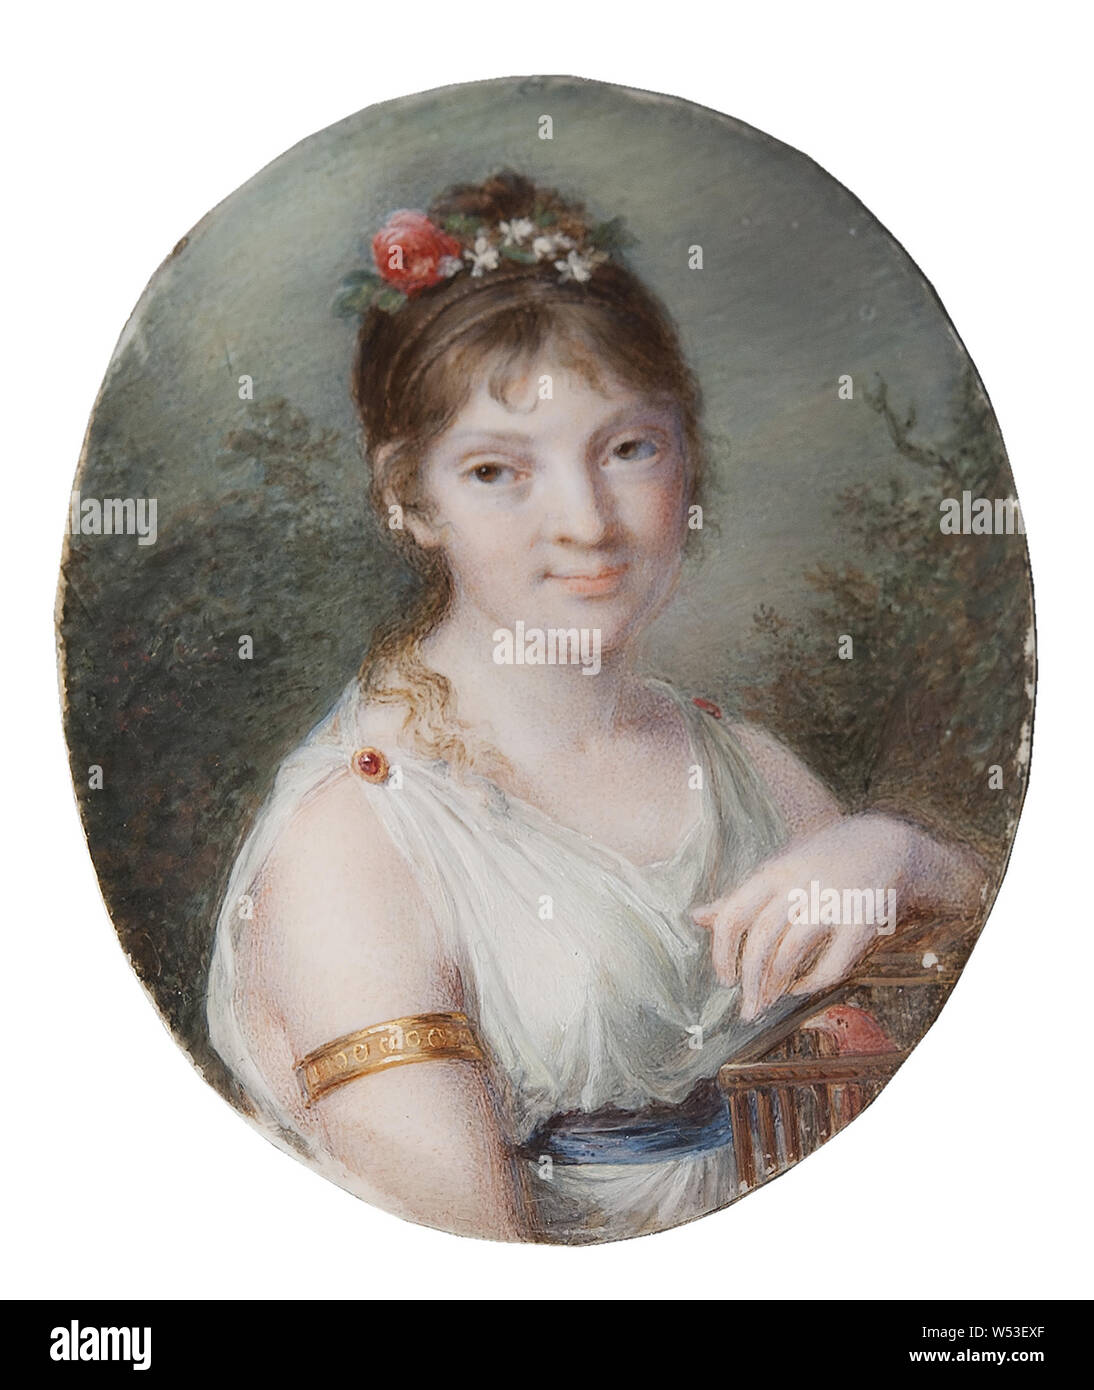 Egron Lundgren, Roman woman, Romarinna, painting, from 1845 until 1849, Watercolor on ivory, Height, 7.5 cm (2.9 inches), Width, 6.5 cm (2.5 inches) Stock Photo